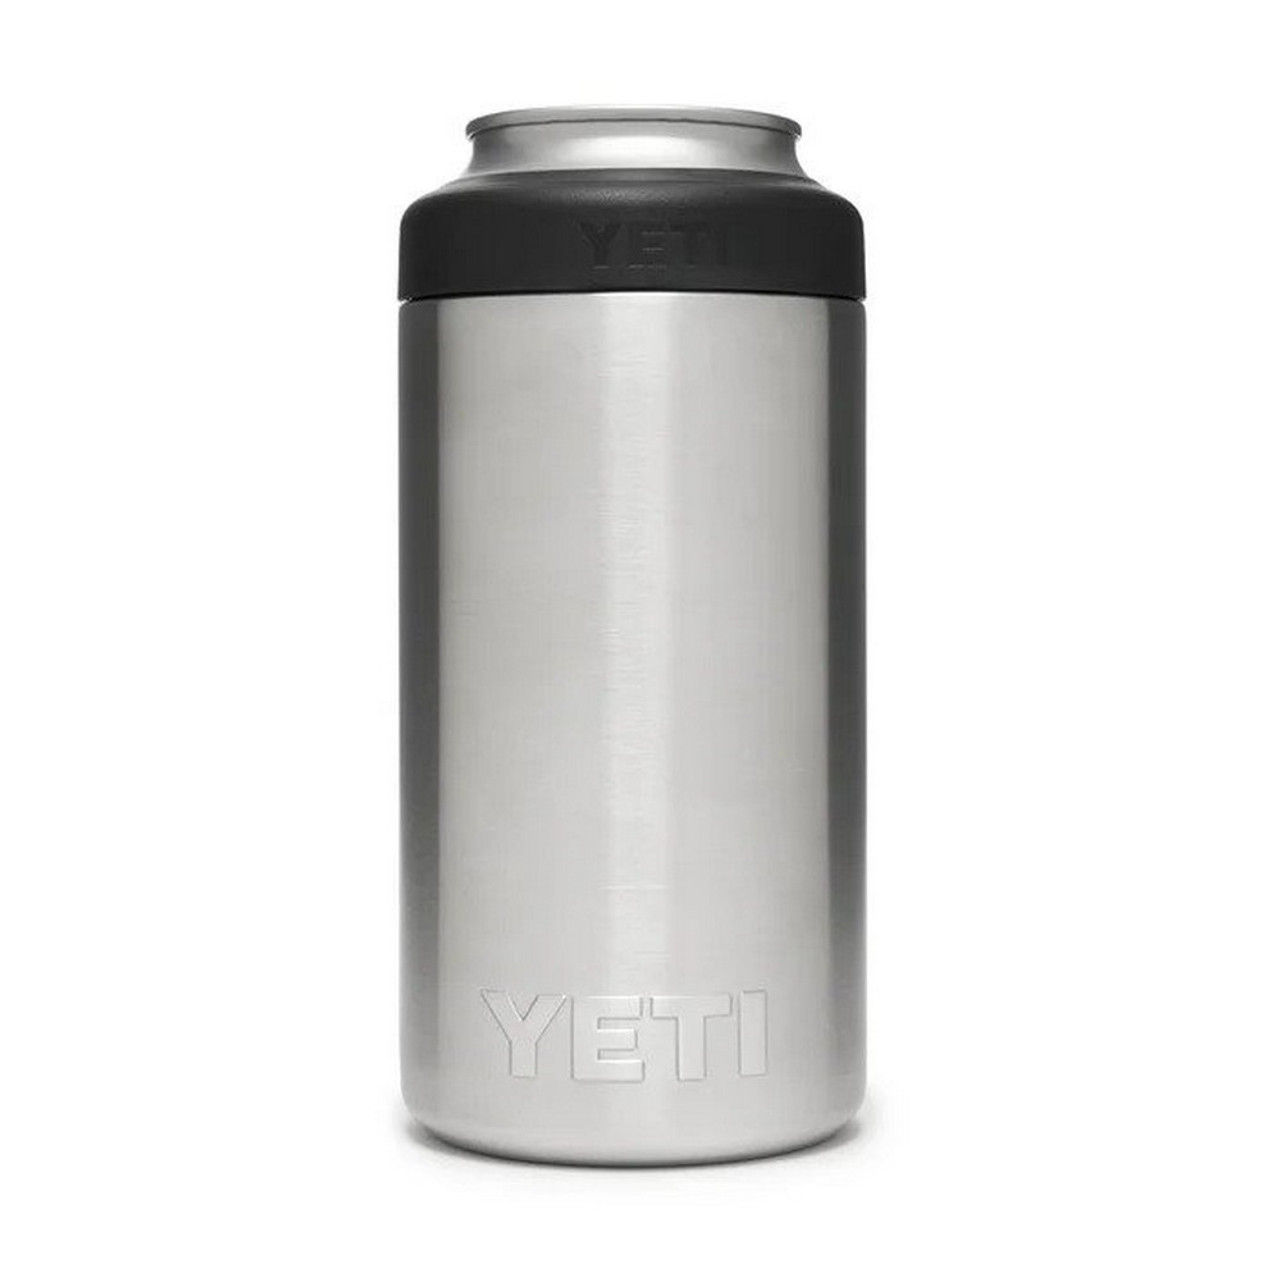 https://cdn11.bigcommerce.com/s-t1n43taf3i/images/stencil/1280x1280/products/32274/136000/Yeti-Rambler-16oz-Tall-Can-Insulator_STAINLES_1__97356.1645569610.jpg?c=2